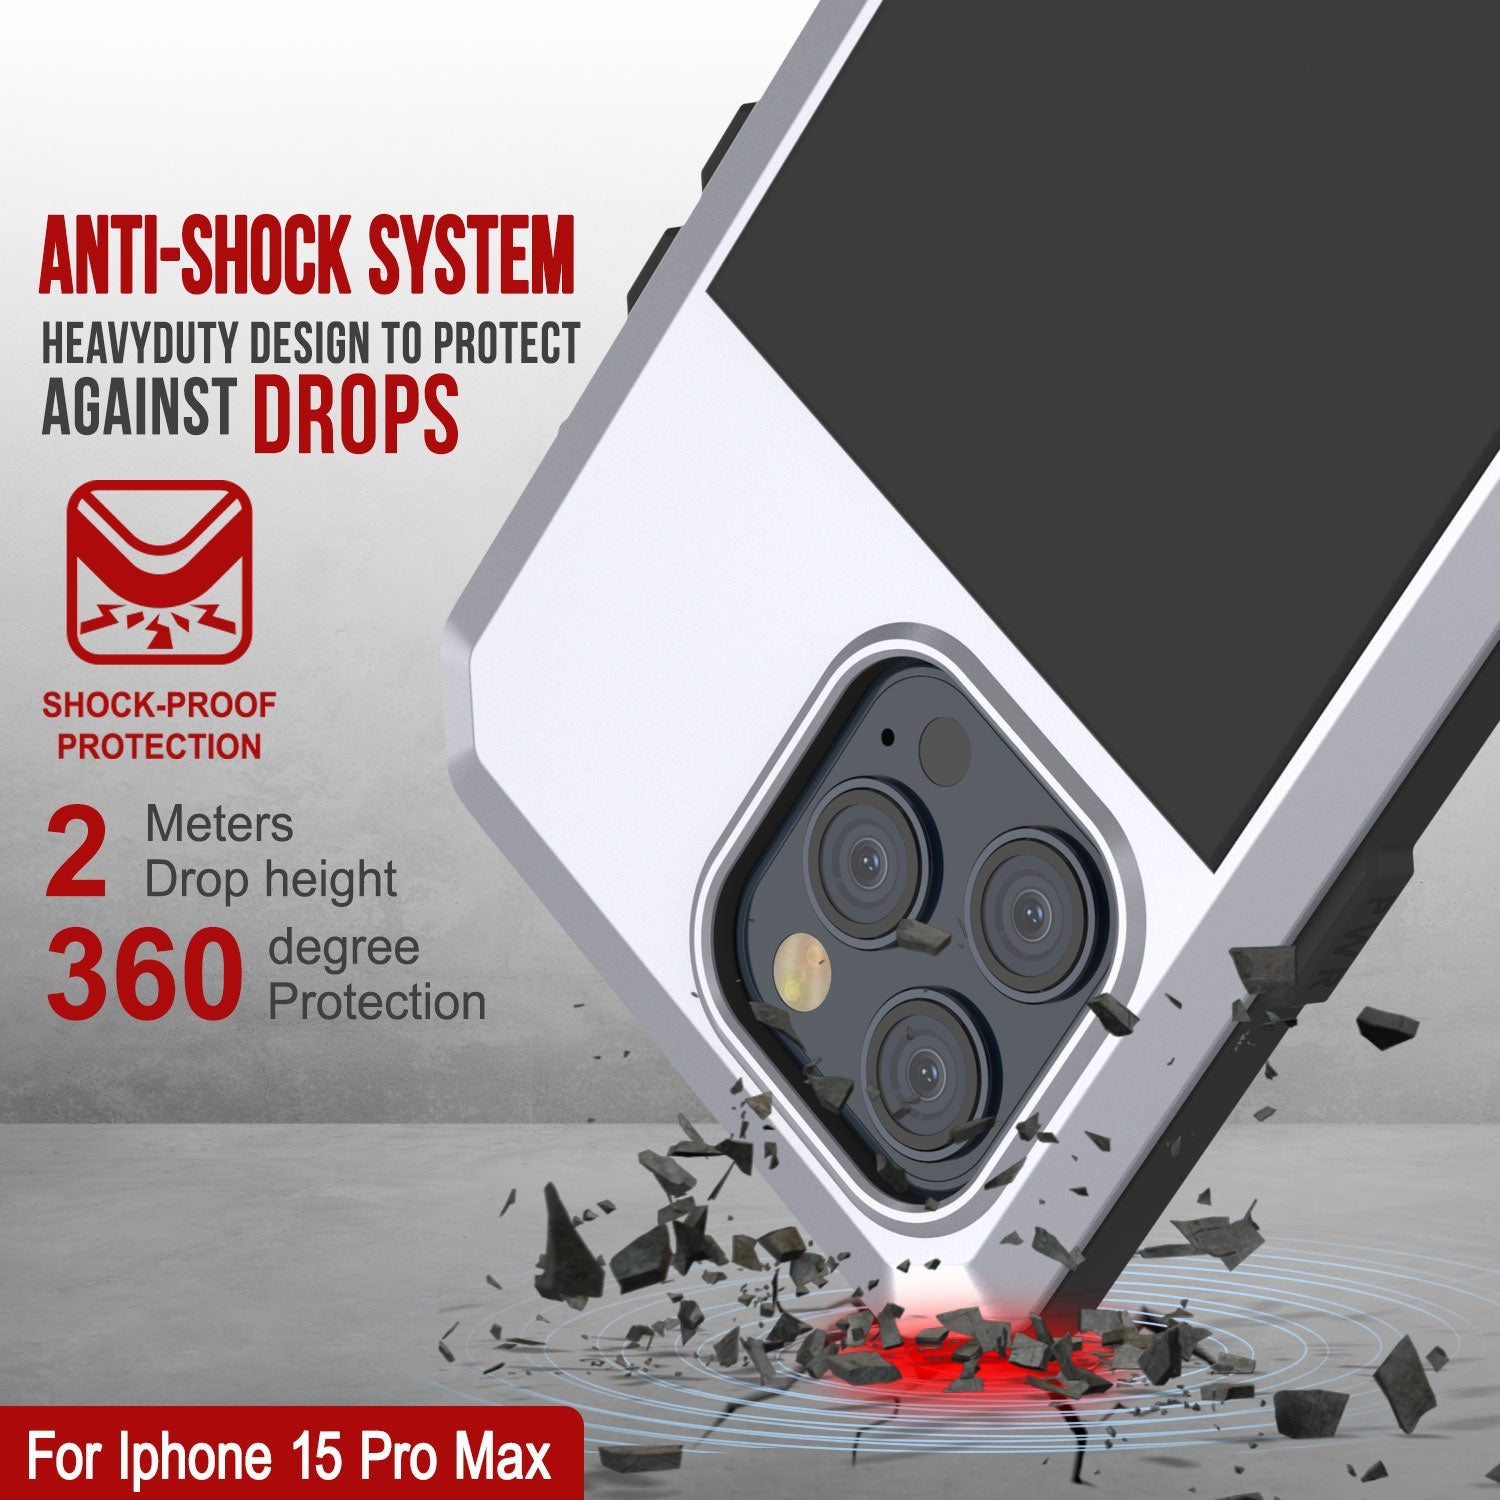 iPhone 15 Pro Max Metal Case, Heavy Duty Military Grade Armor Cover [shock proof] Full Body Hard [White]